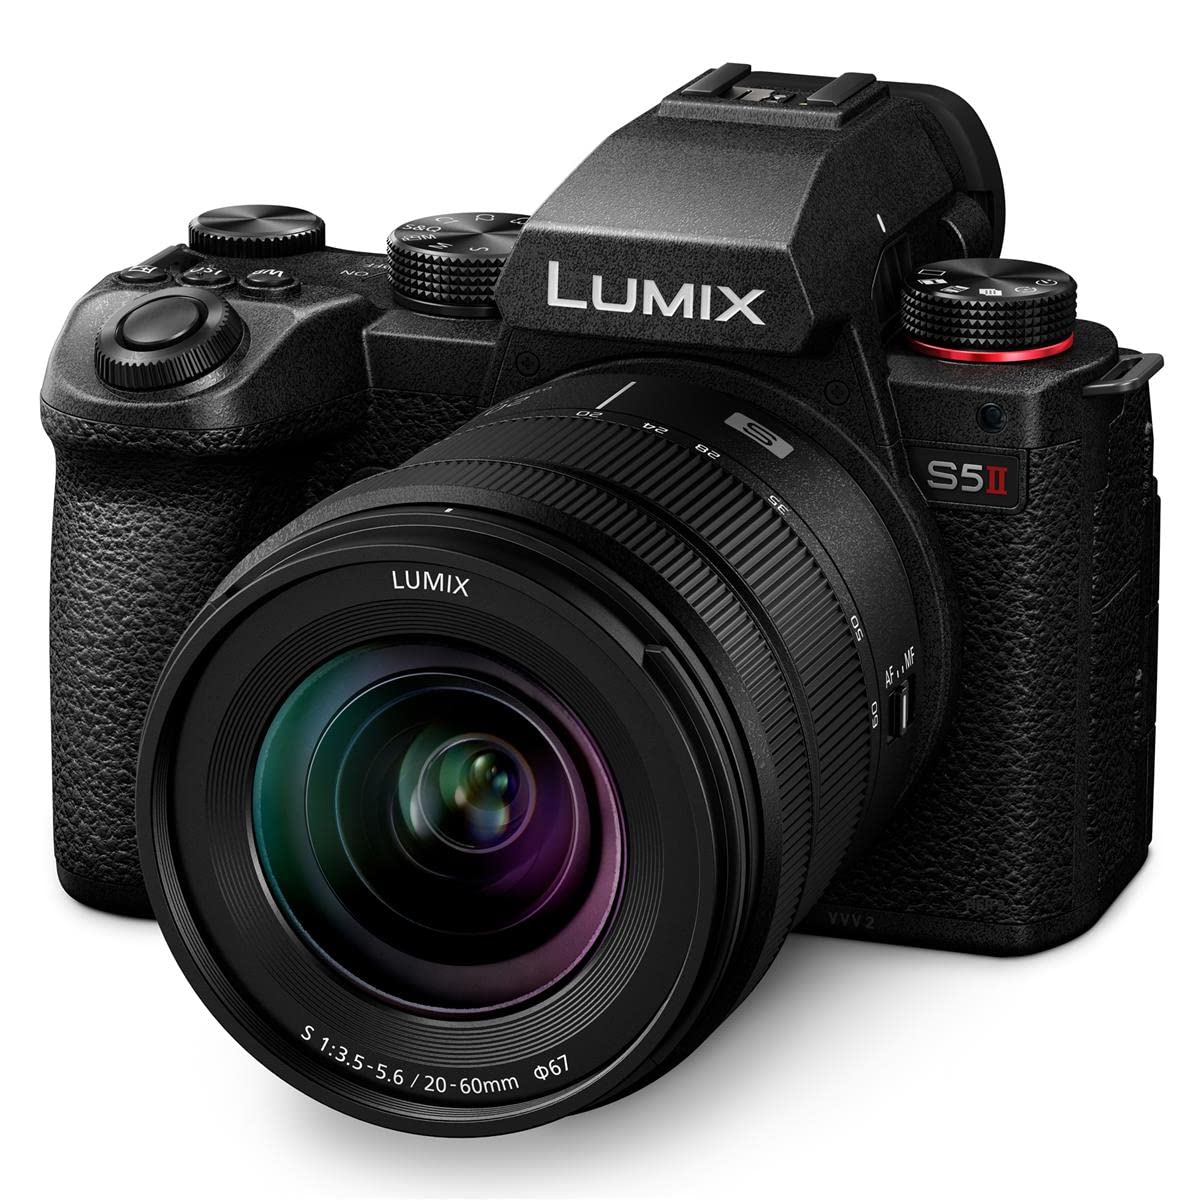 Panasonic LUMIX S5 II Mirrorless Camera with Lumix S 20-60mm f/3.5-5.6 Lens Bundle with Speedlight, 128GB SD Card, Backpack, 2X Battery, Dual Charger, Strap, Aluminum Tripod, and Accessories